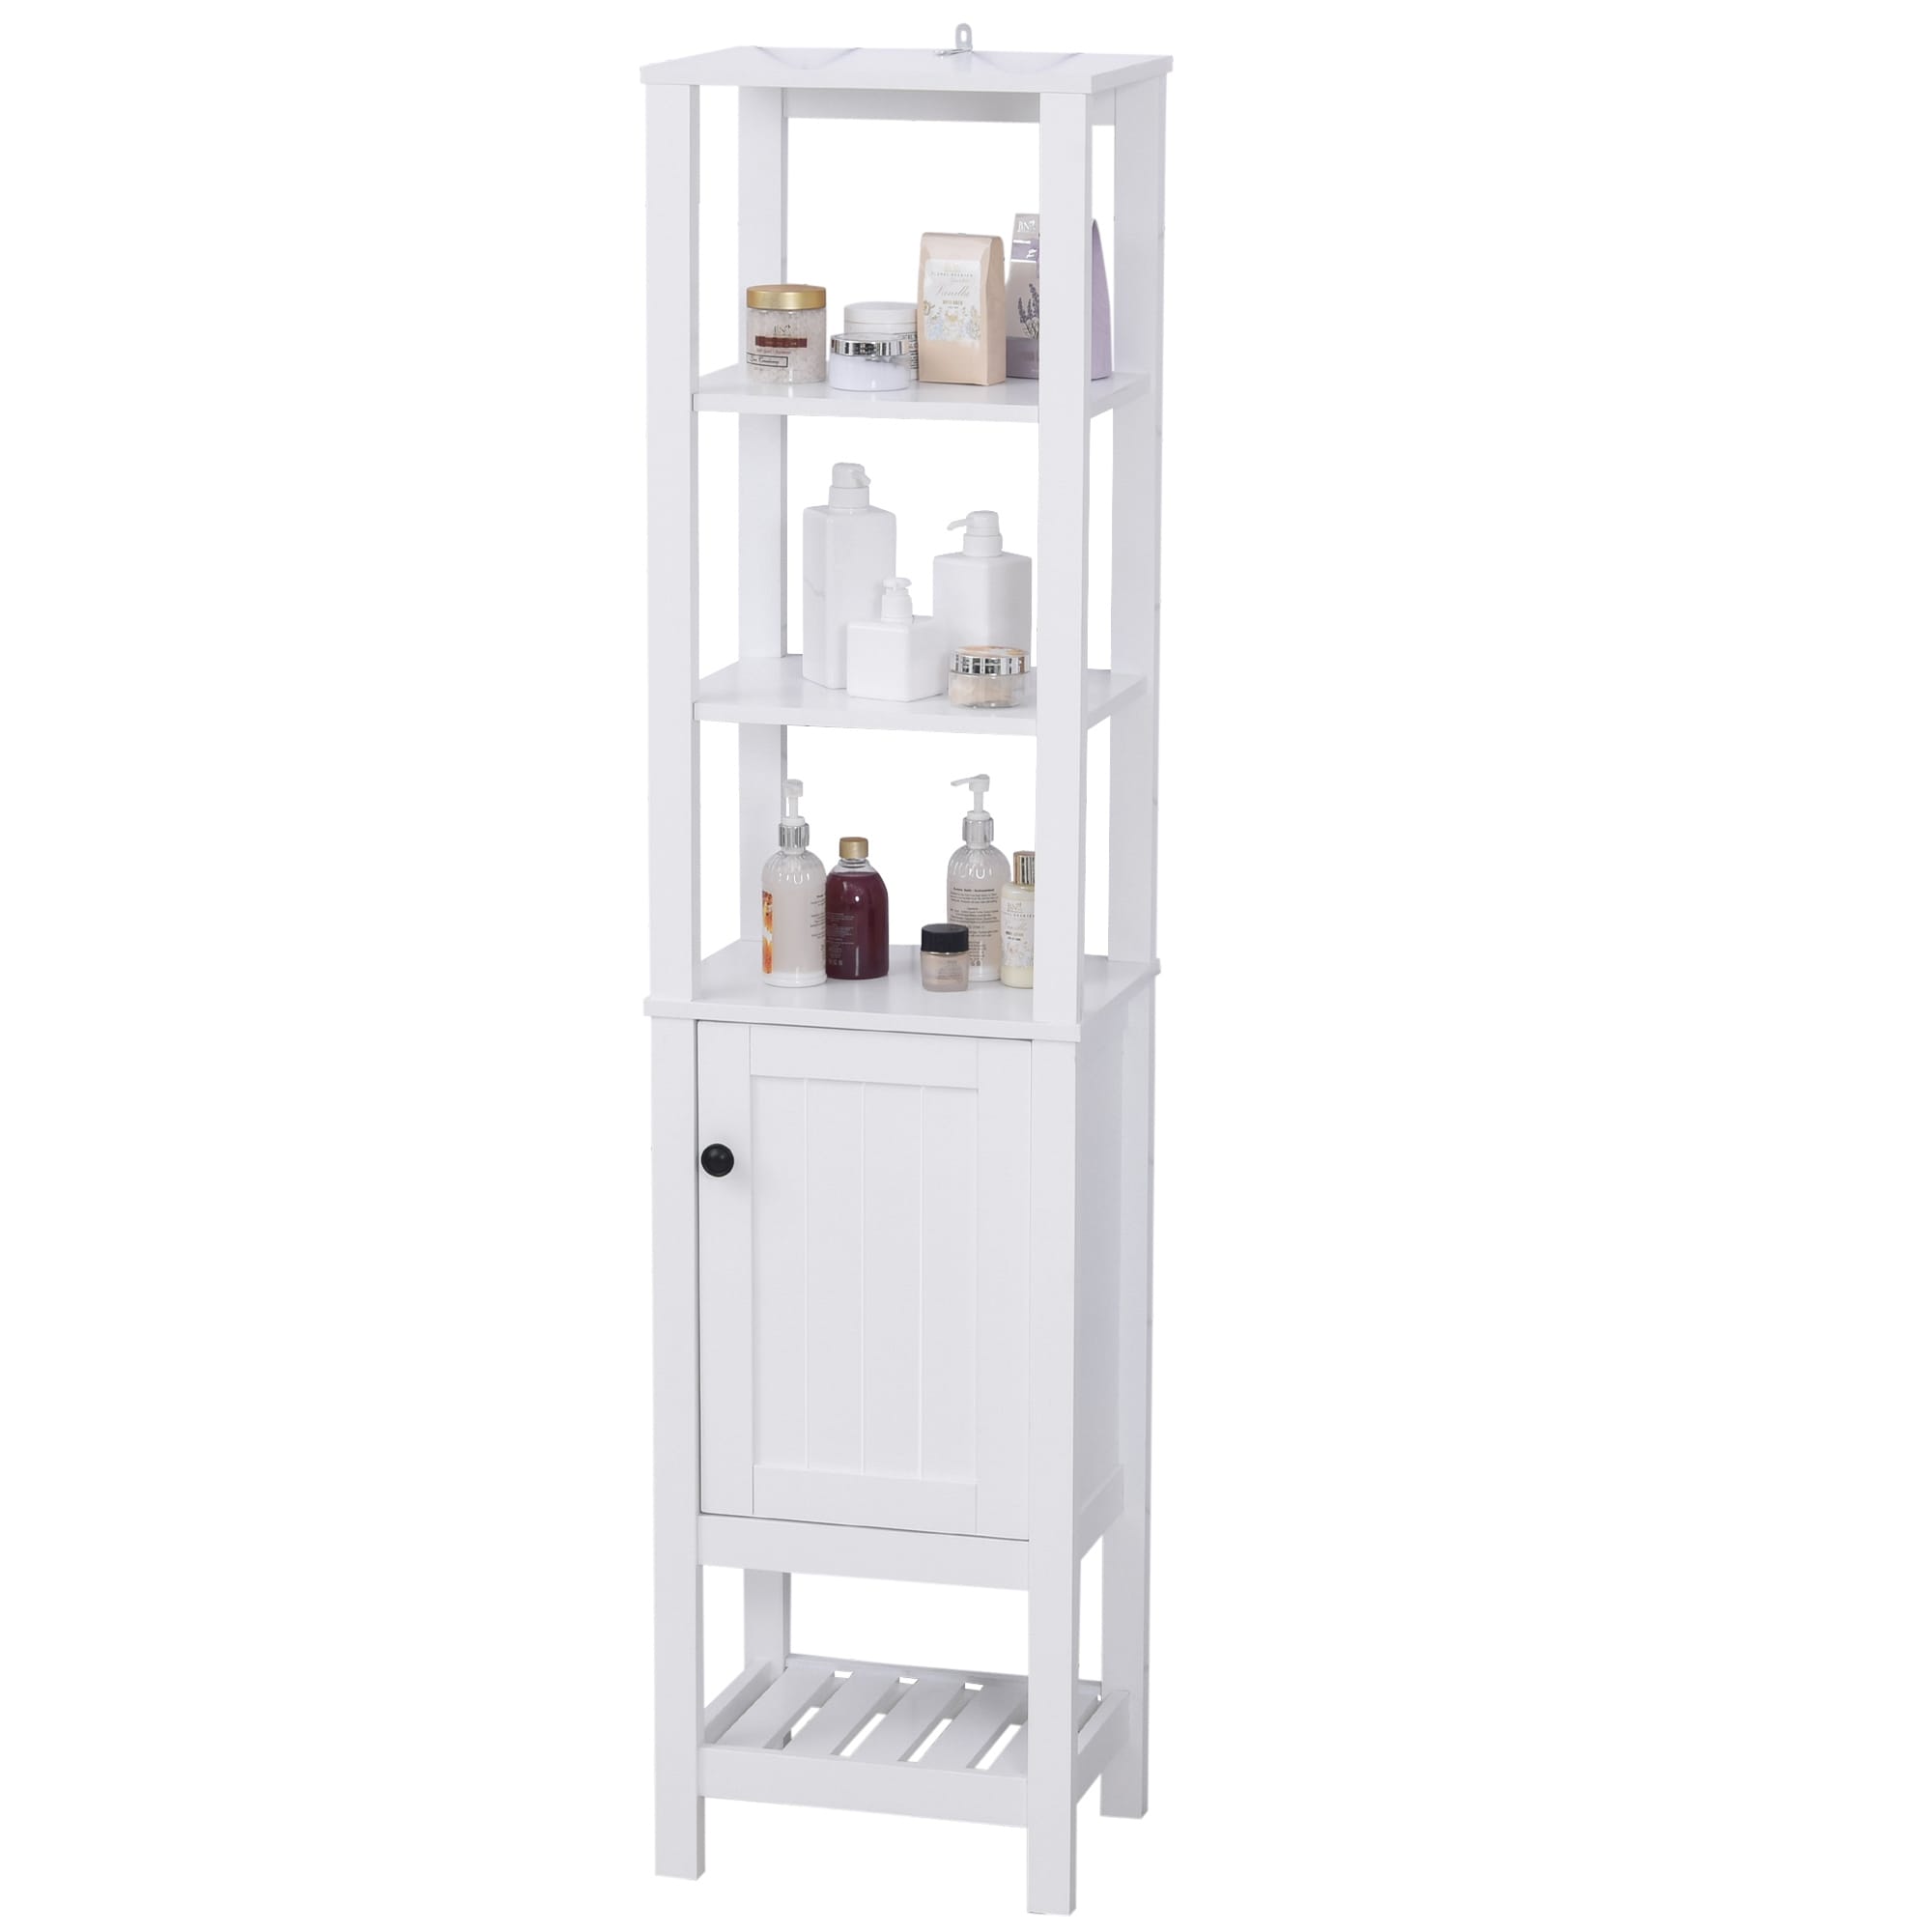 https://ak1.ostkcdn.com/images/products/is/images/direct/2a8c25ed7f3b64e1dfe7afa59ad134f744cc5432/HOMCOM-Freestanding-Wood-Bathroom-Storage-Tall-Cabinet-Organizer-Tower-with-Shelves-%26-Compact-Design%2C-White.jpg